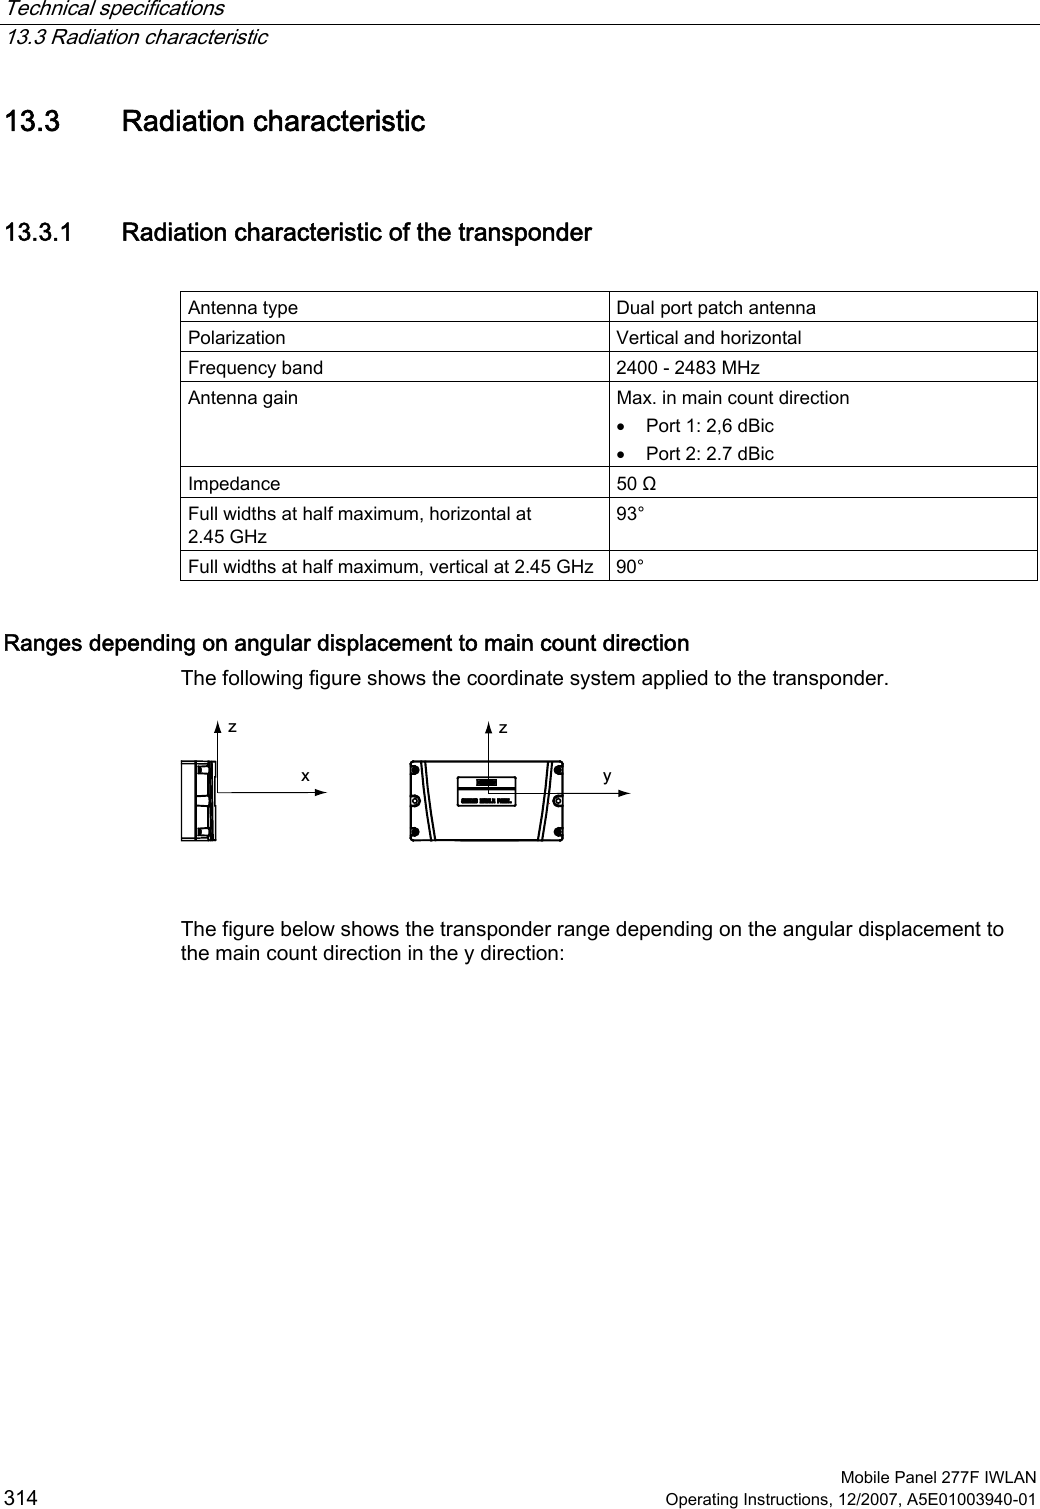 Technical specifications   13.3 Radiation characteristic  Mobile Panel 277F IWLAN 314 Operating Instructions, 12/2007, A5E01003940-01 13.3 Radiation characteristic 13.3.1 Radiation characteristic of the transponder  Antenna type  Dual port patch antenna Polarization  Vertical and horizontal Frequency band  2400 - 2483 MHz Antenna gain  Max. in main count direction • Port 1: 2,6 dBic • Port 2: 2.7 dBic Impedance  50 Ω Full widths at half maximum, horizontal at 2.45 GHz 93° Full widths at half maximum, vertical at 2.45 GHz  90° Ranges depending on angular displacement to main count direction The following figure shows the coordinate system applied to the transponder. []\]   The figure below shows the transponder range depending on the angular displacement to the main count direction in the y direction: 